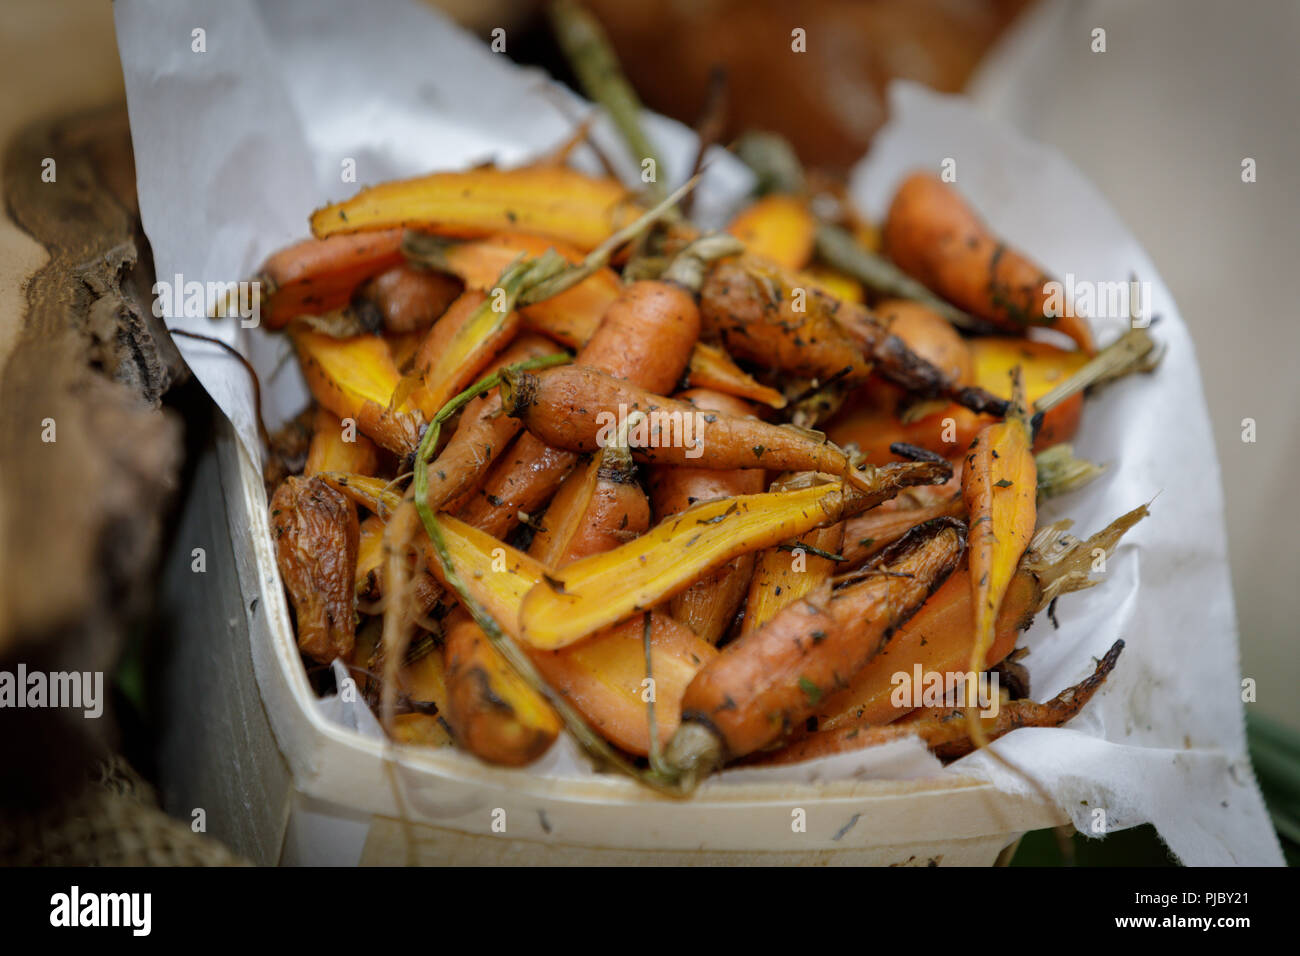 Gourmet roasted carrots cooked with herbs Stock Photo